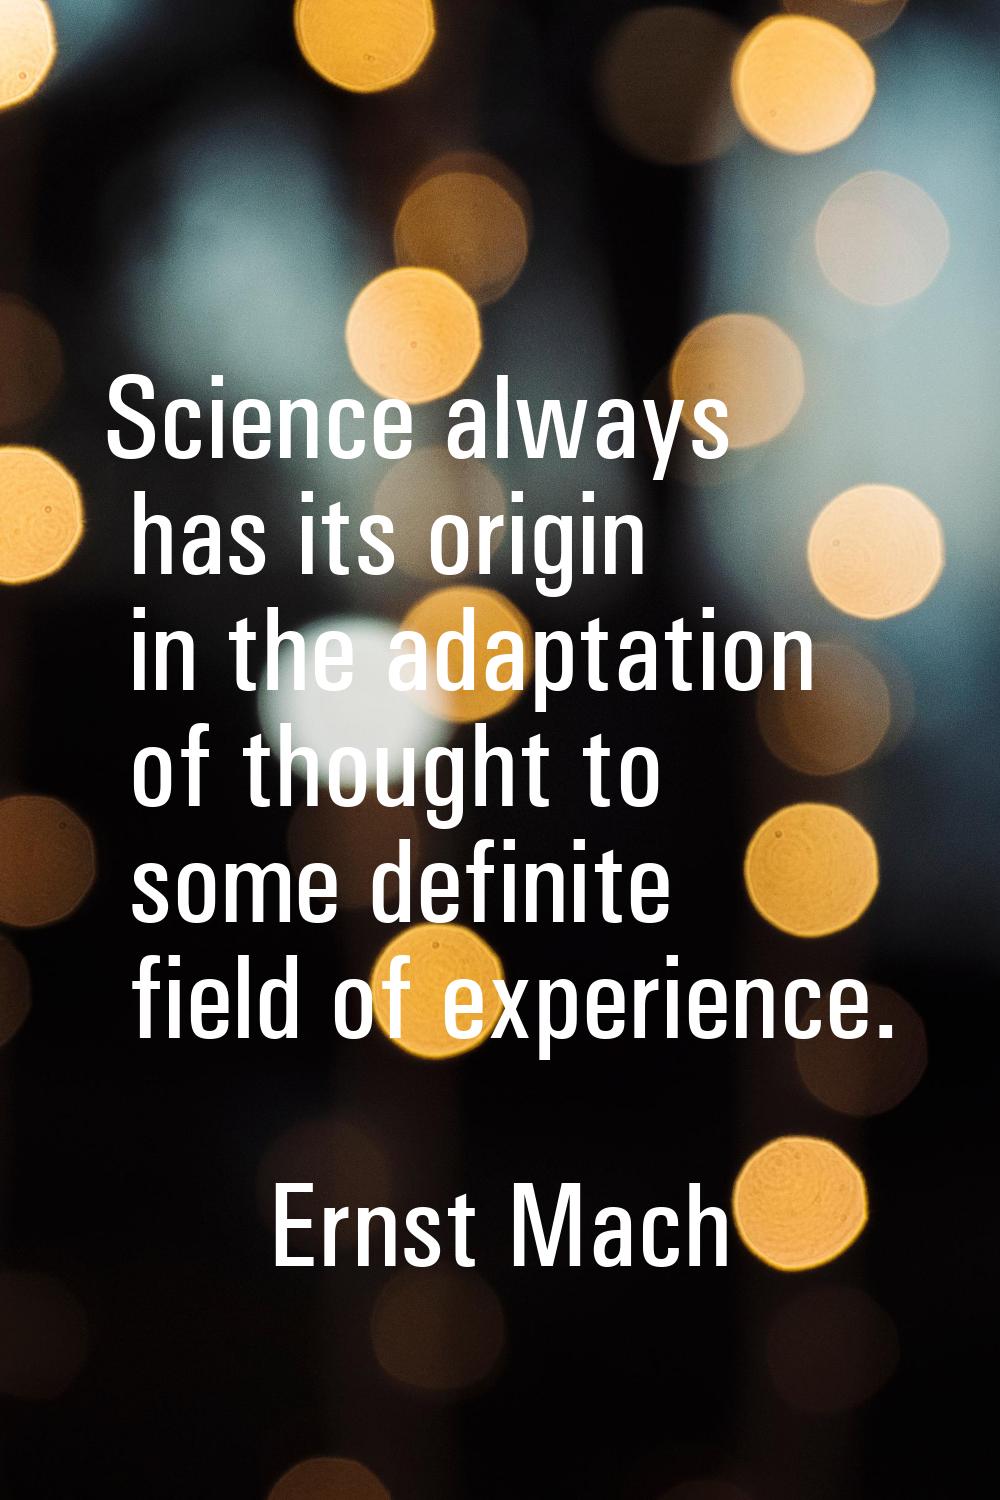 Science always has its origin in the adaptation of thought to some definite field of experience.